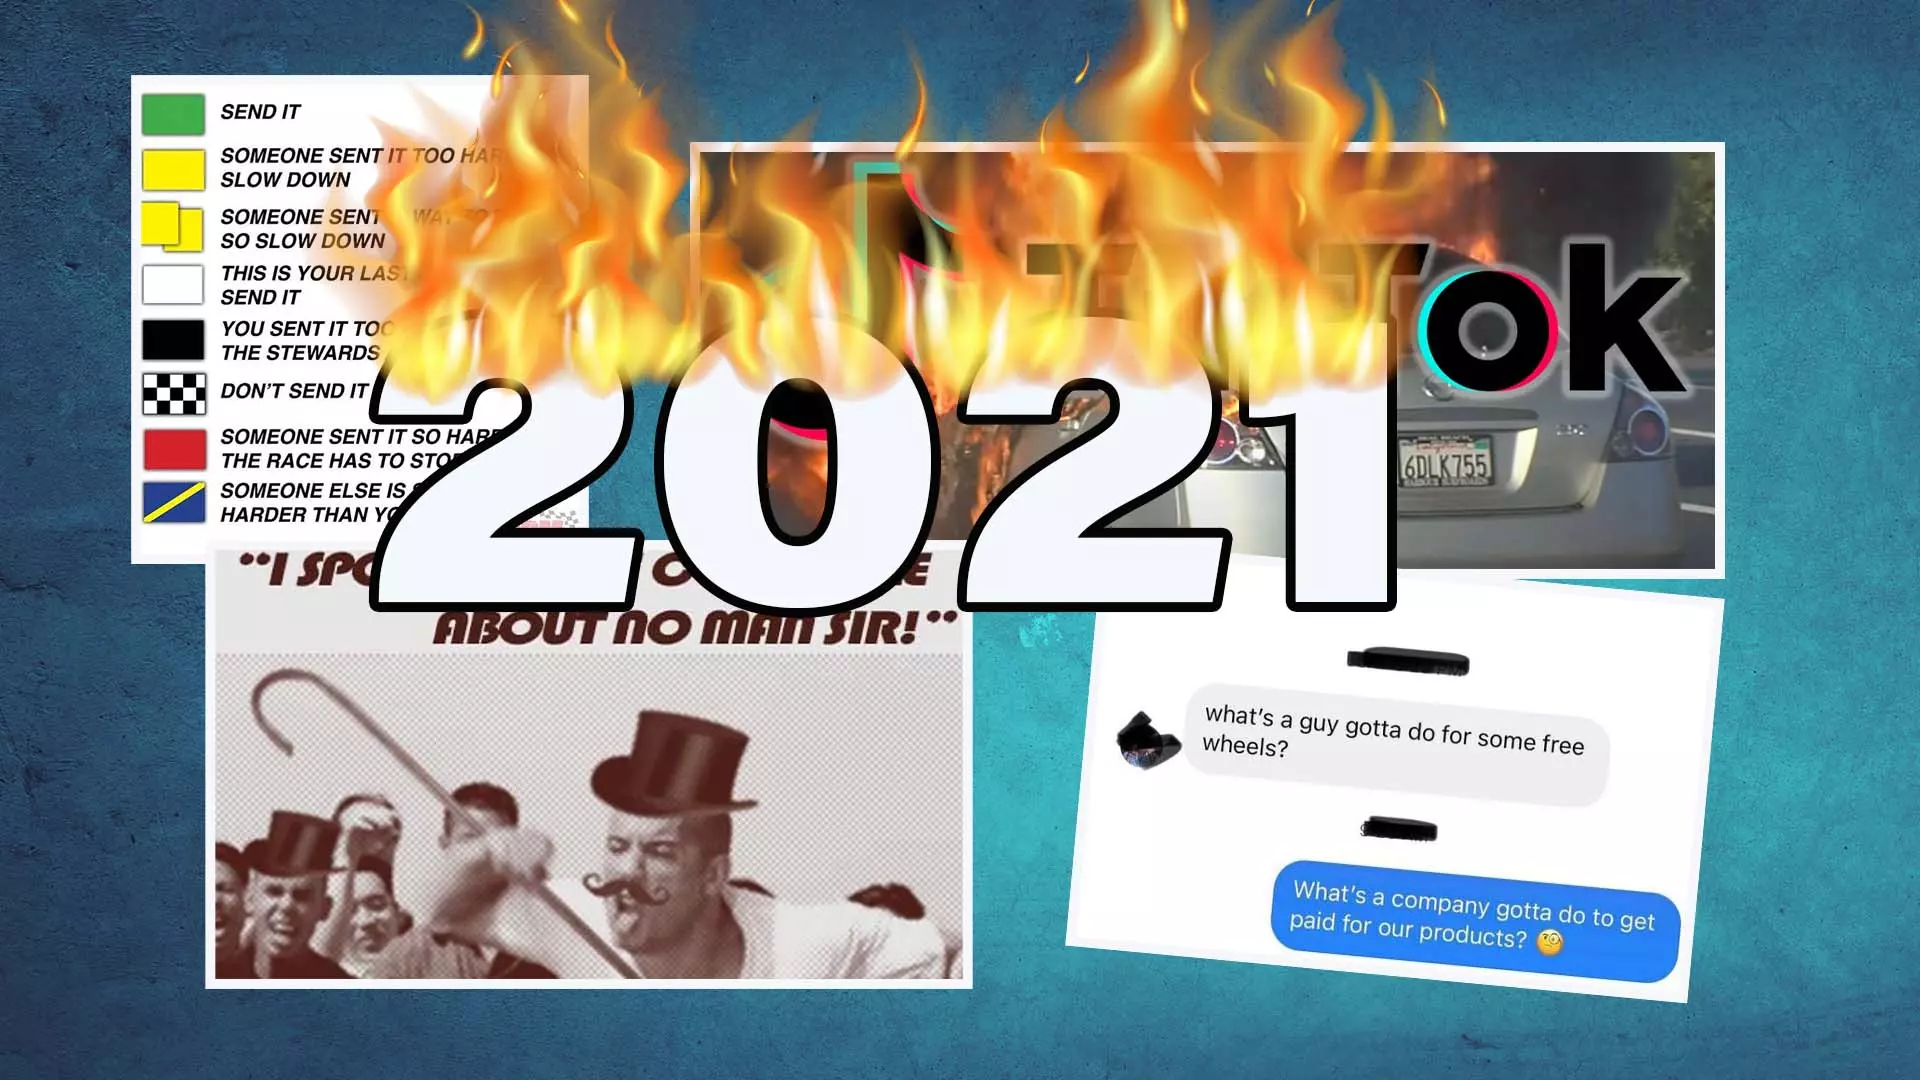 The Most Lit Car Meme Games I Saw in 2021